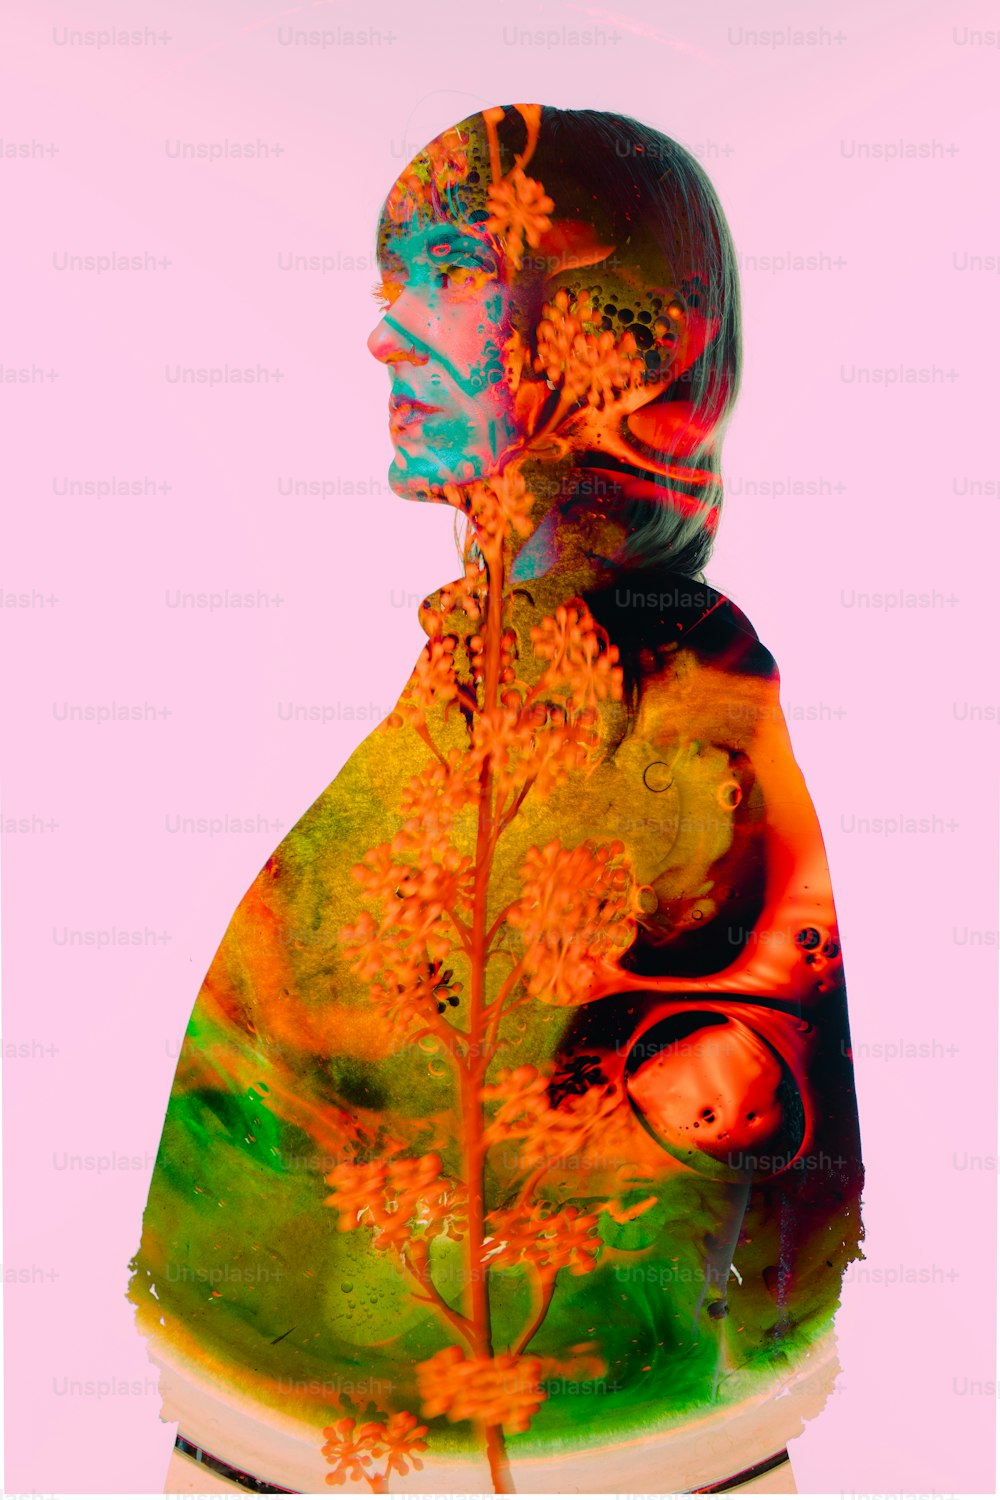 a woman's face is shown in a multicolored image